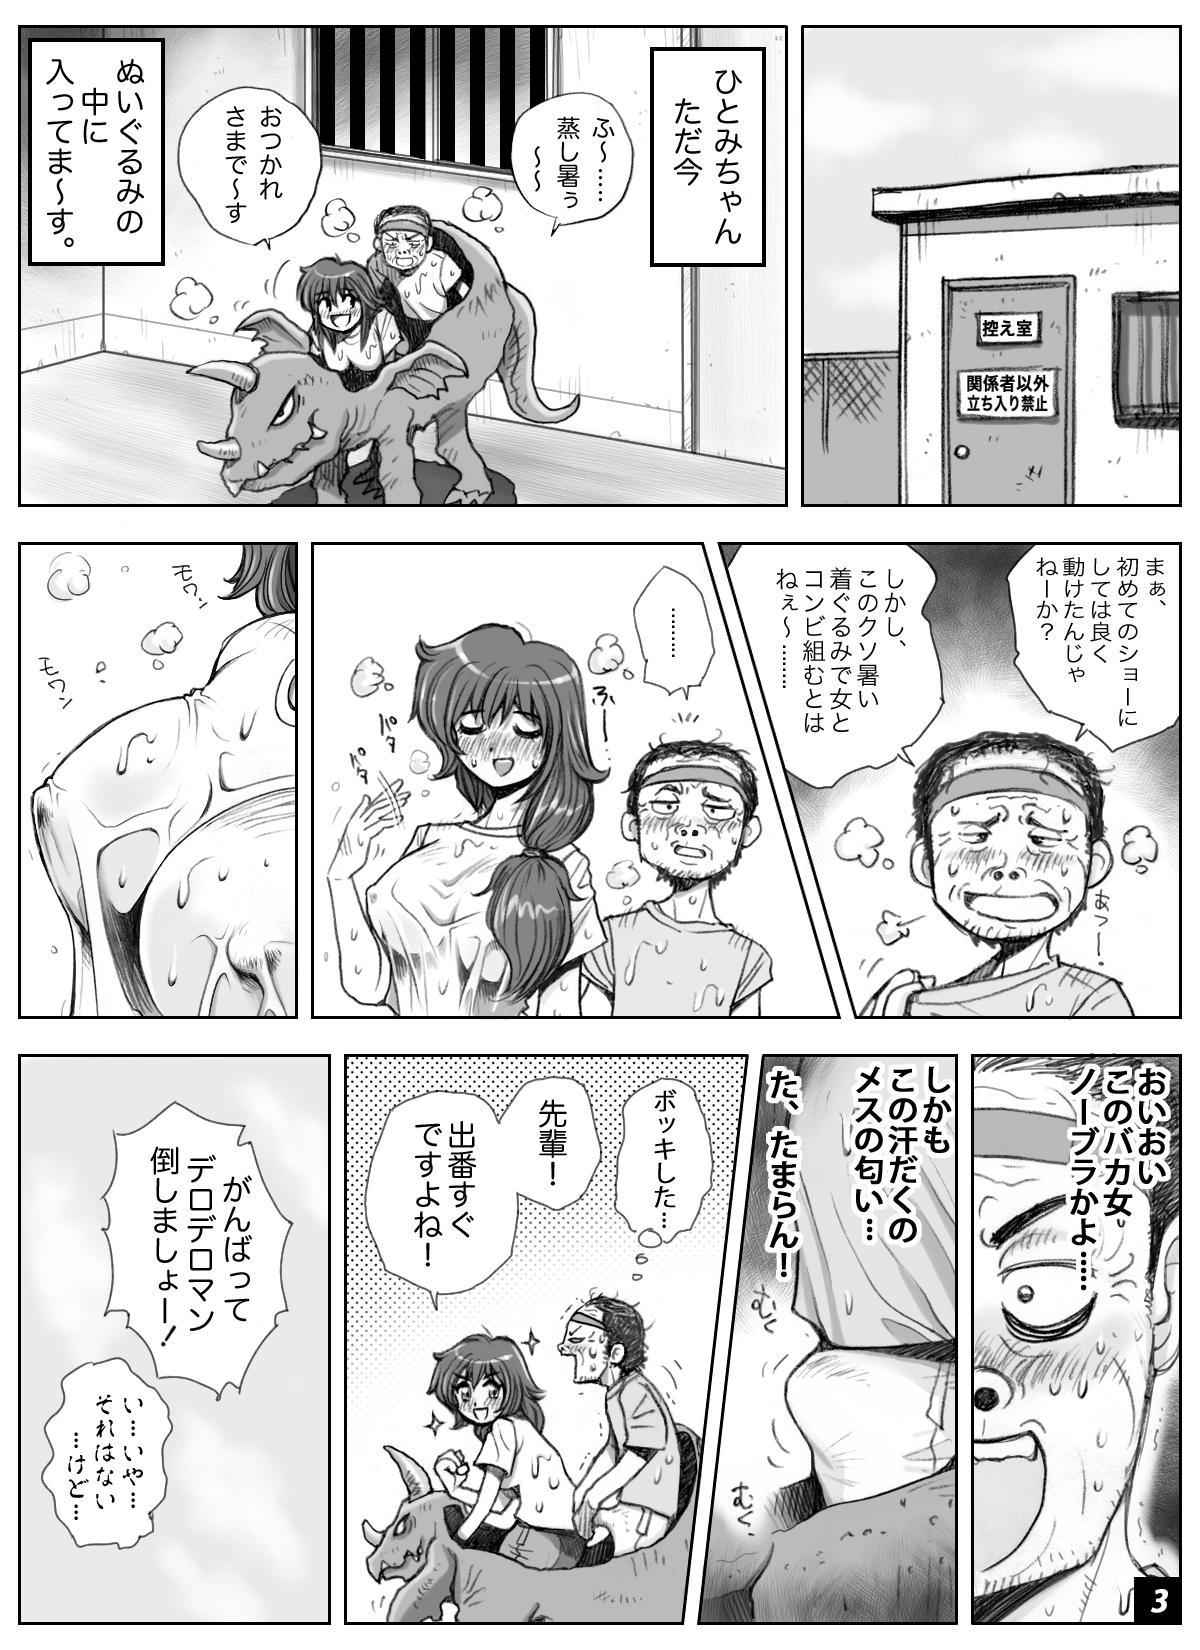 Bald Pussy ikeikeフリーター ひとみちゃん Vol.6 Selfie - Page 3